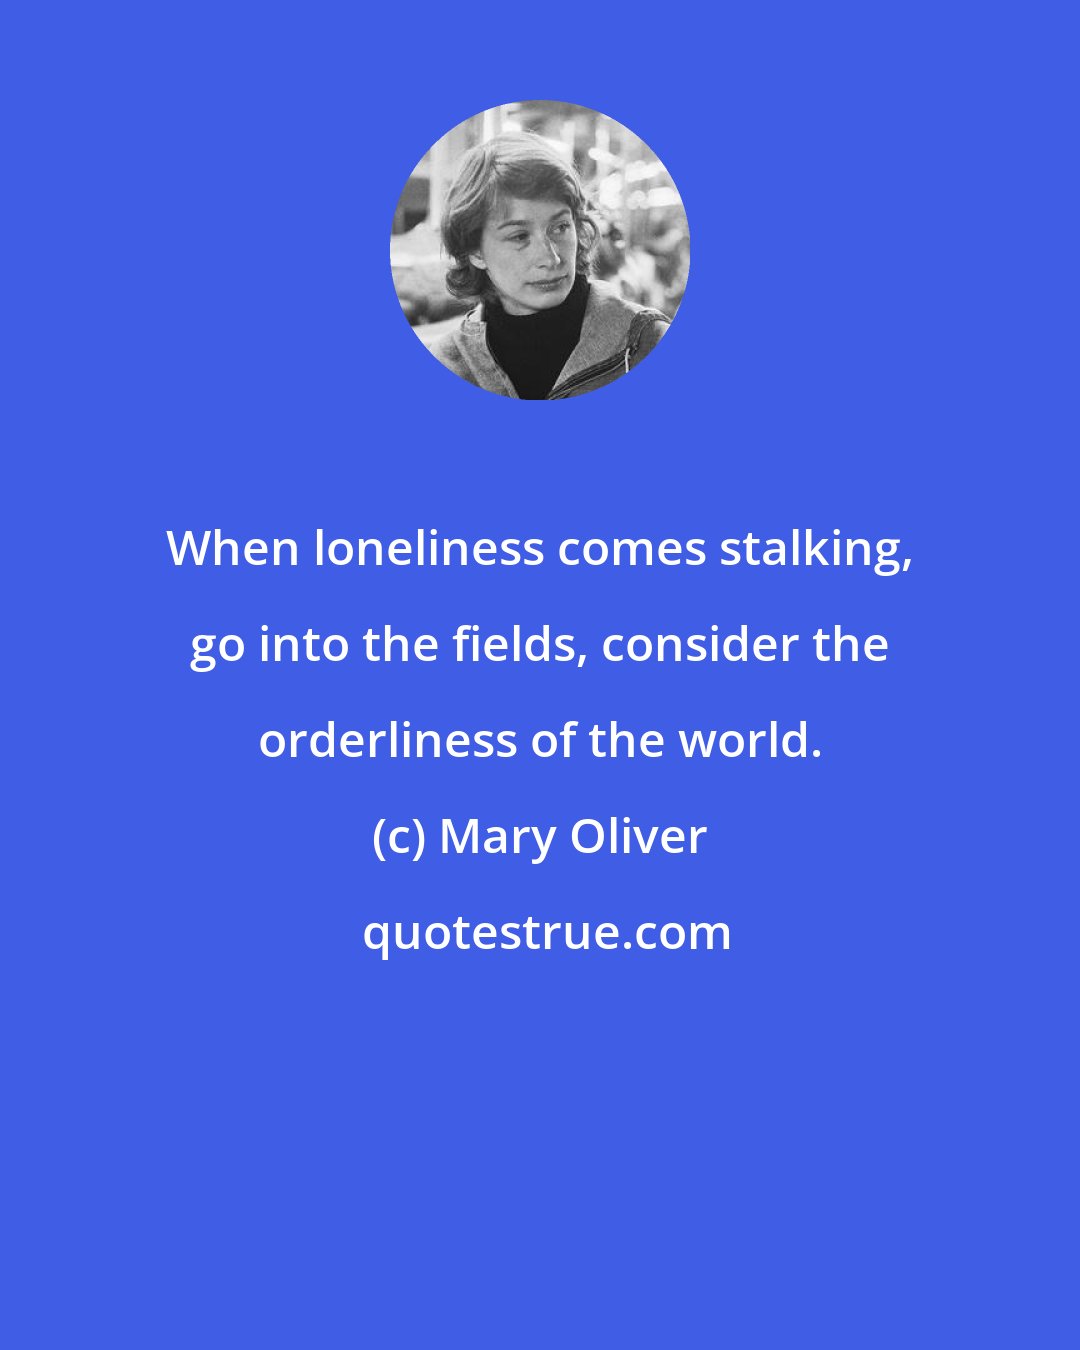 Mary Oliver: When loneliness comes stalking, go into the fields, consider the orderliness of the world.